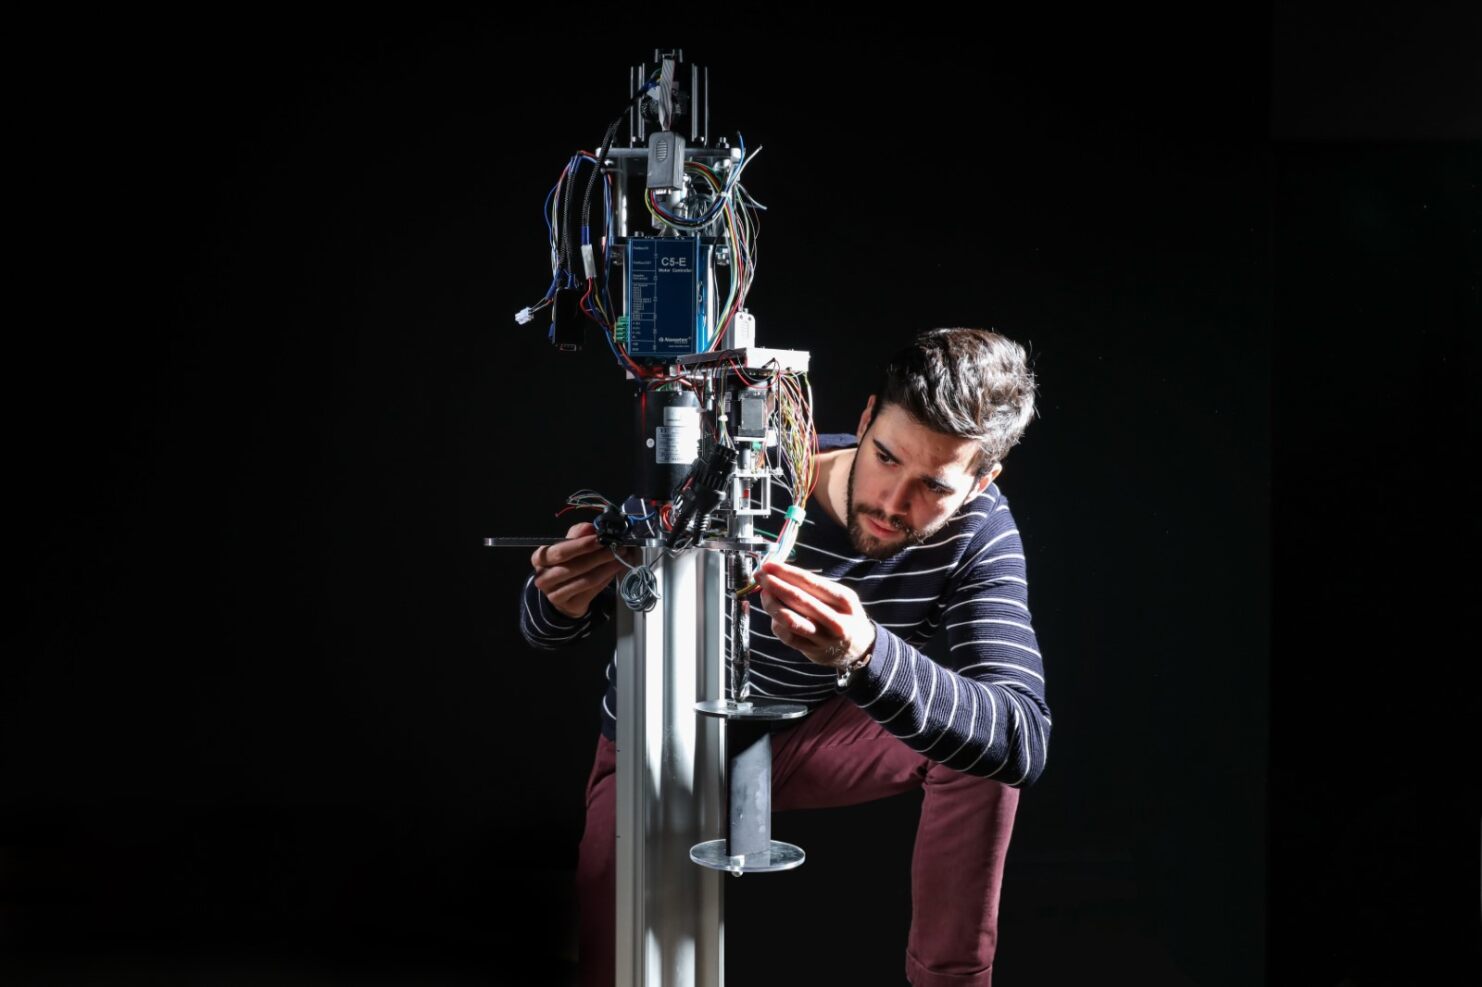 Sébastien Le Fouest with his motorised miniature vertical axis wind turbine equipped with sensors.